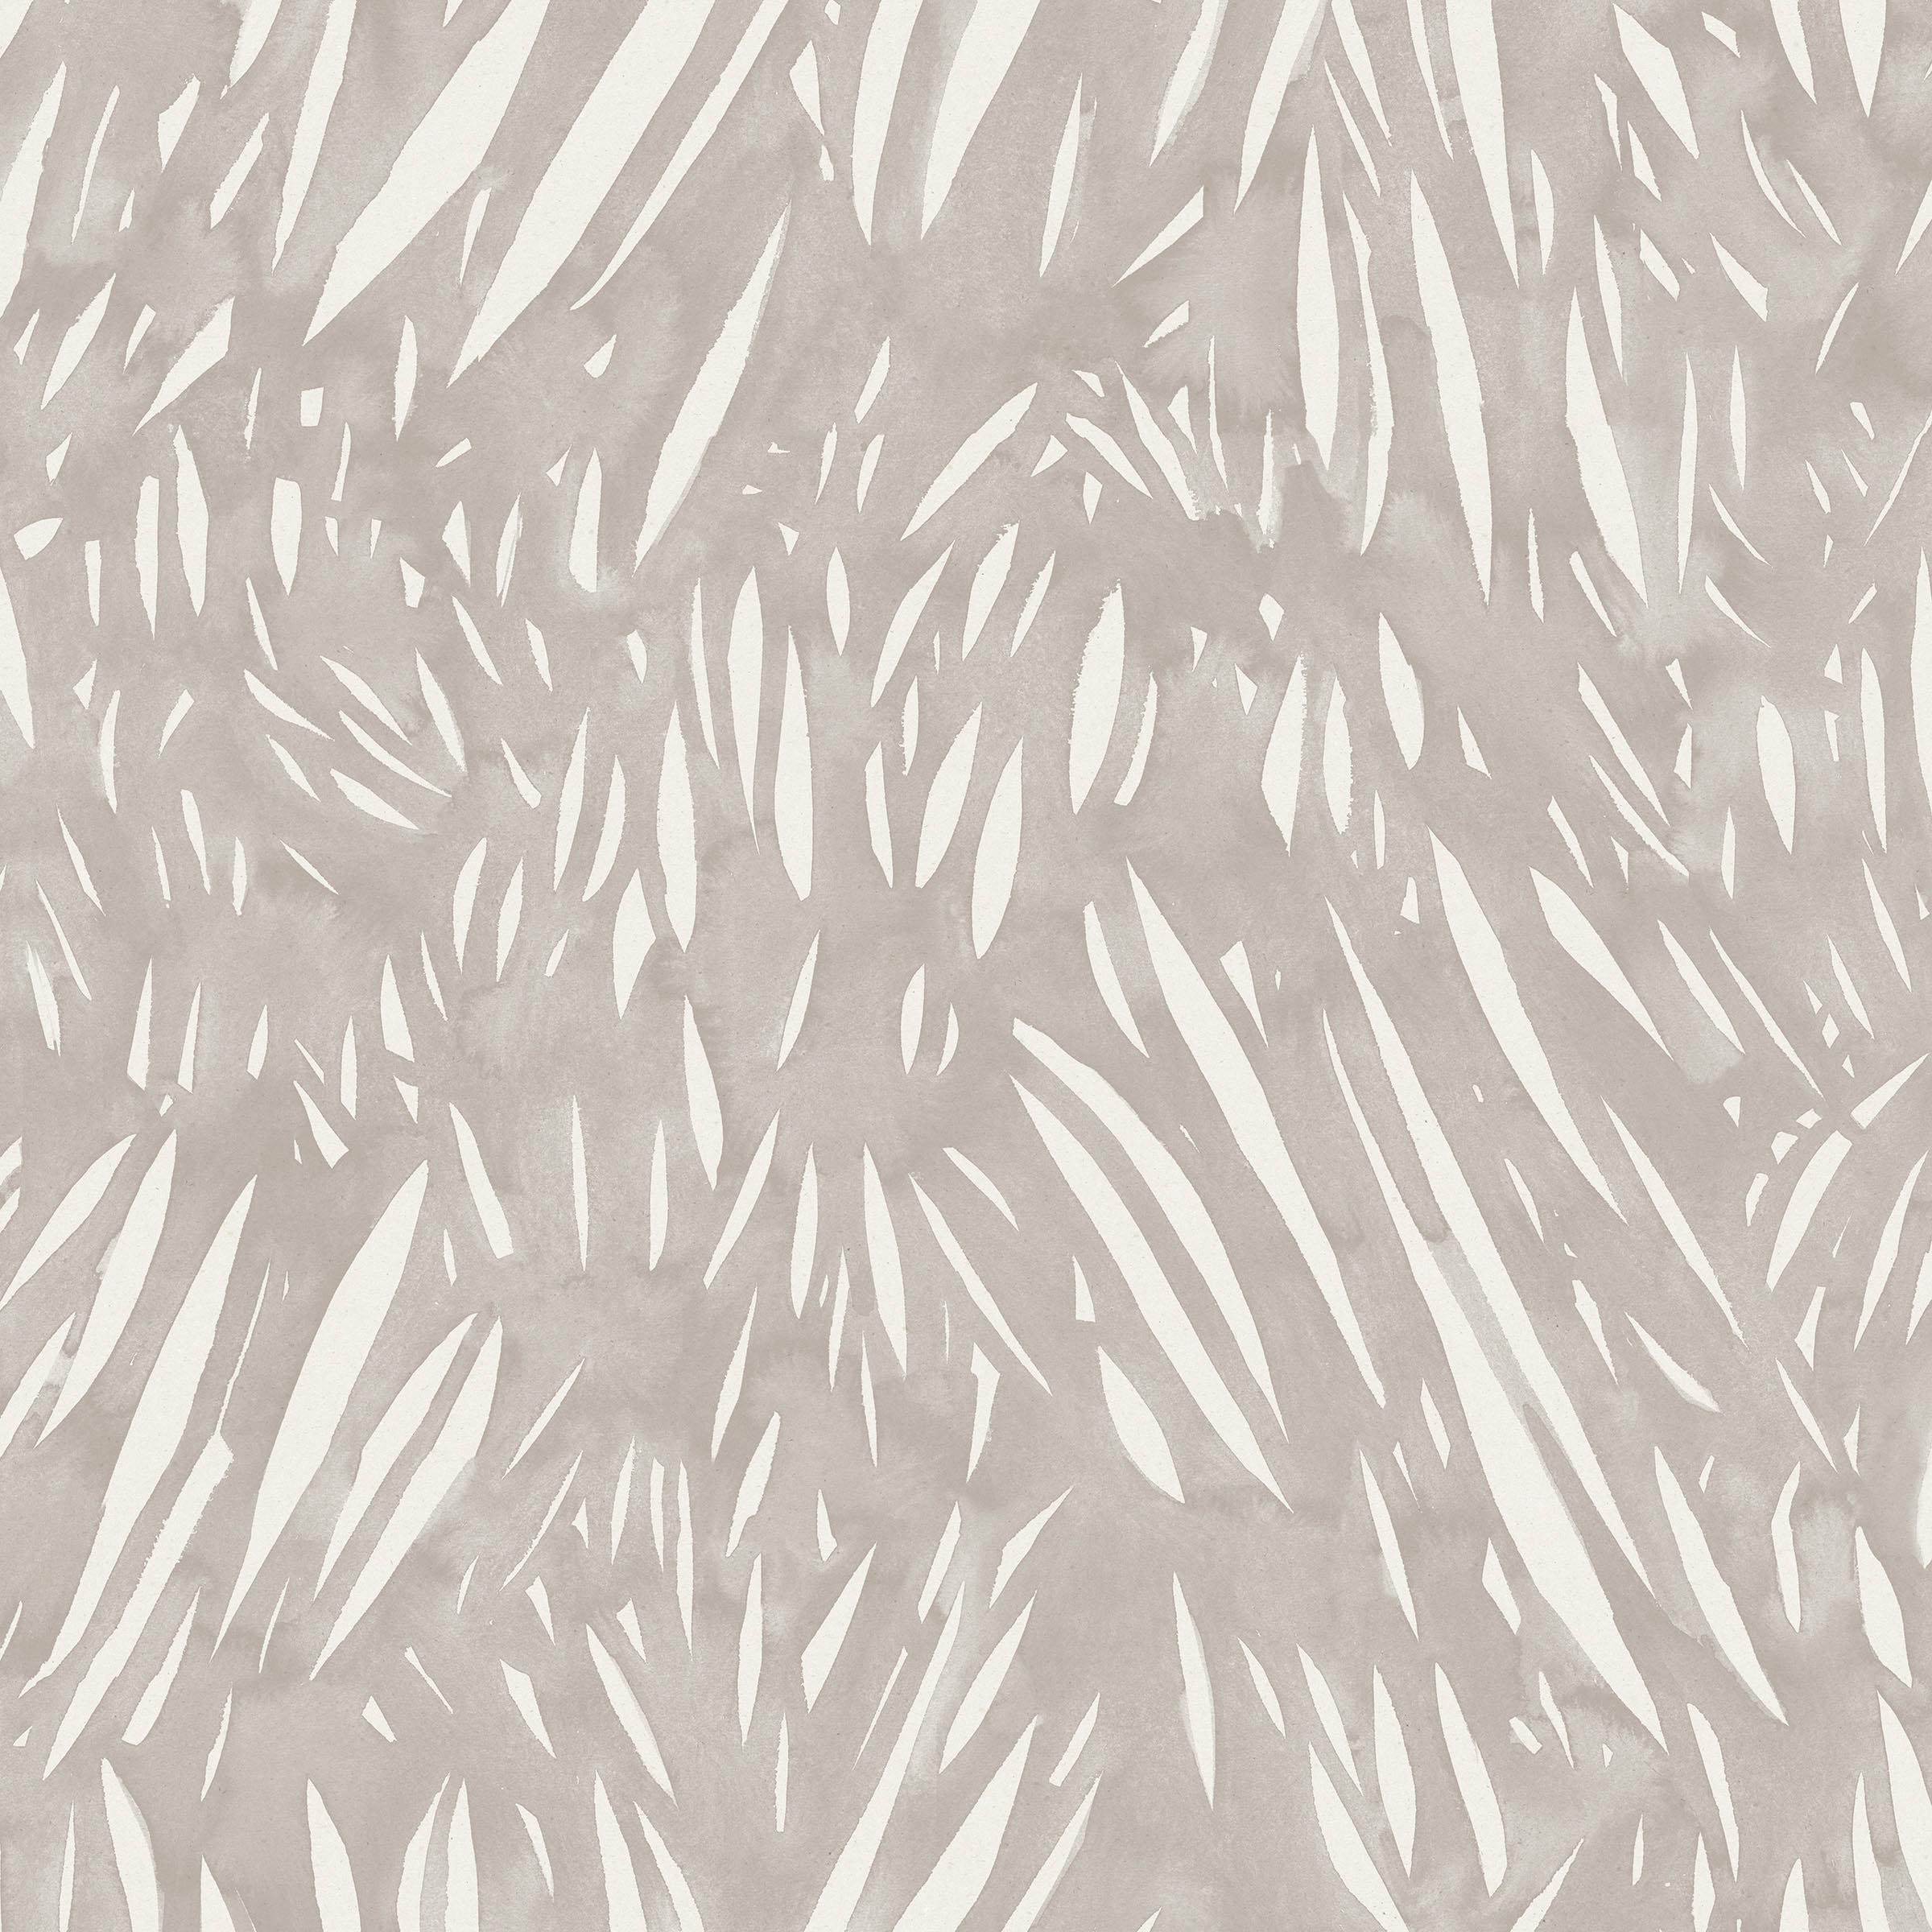 Detail of wallpaper in an abstract leaf pattern in white on a light gray watercolor field.